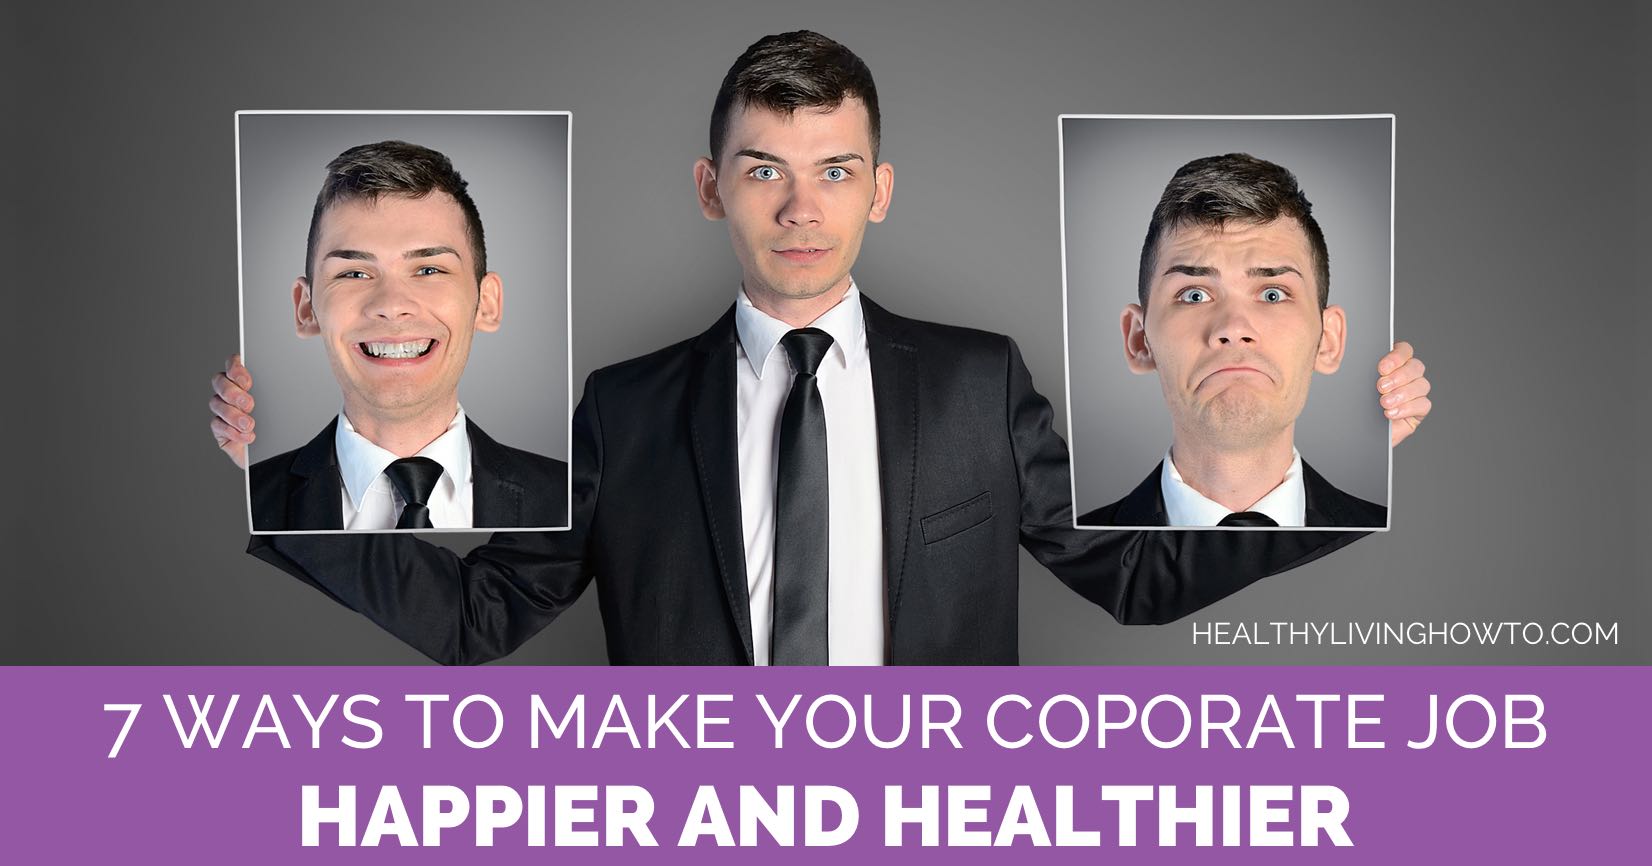 7 Ways to Make Your Corporate Job Happier and Healthier | healthylivinghowto.com.jpg